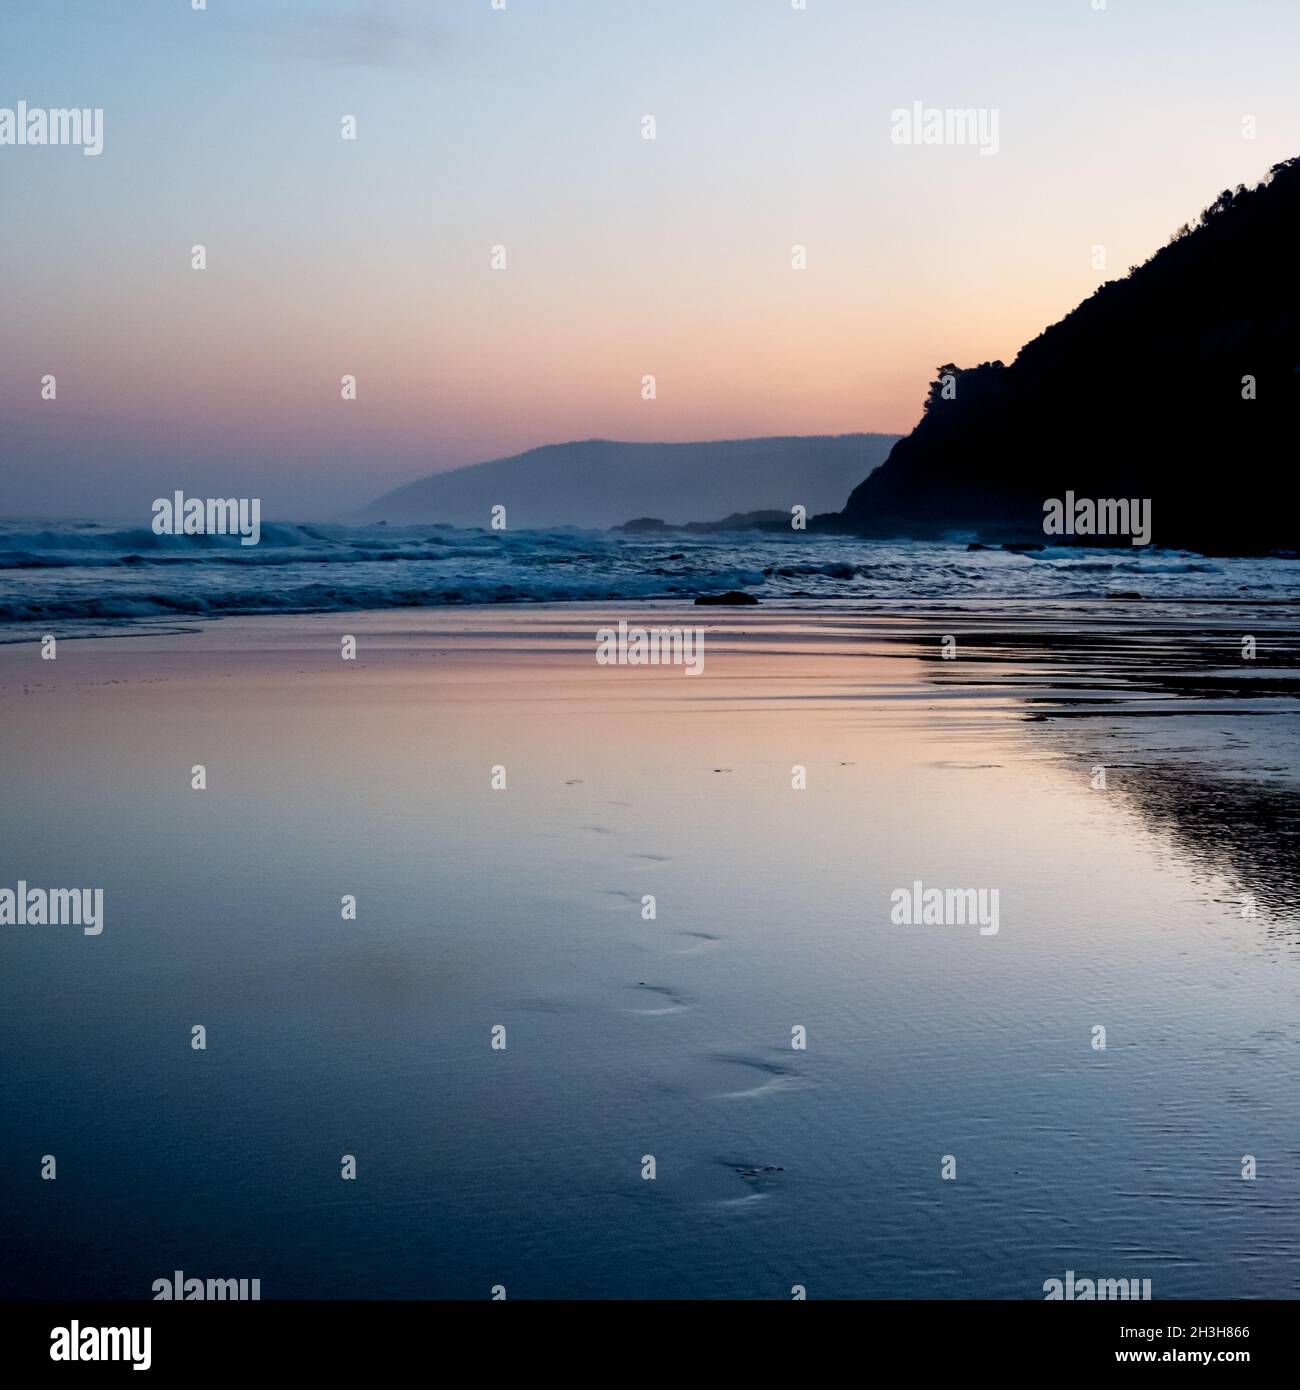 Footprints in sand leading from the sea.  Just after sunset along Australia's Great Ocean Road near Lorne, Victoria Stock Photo